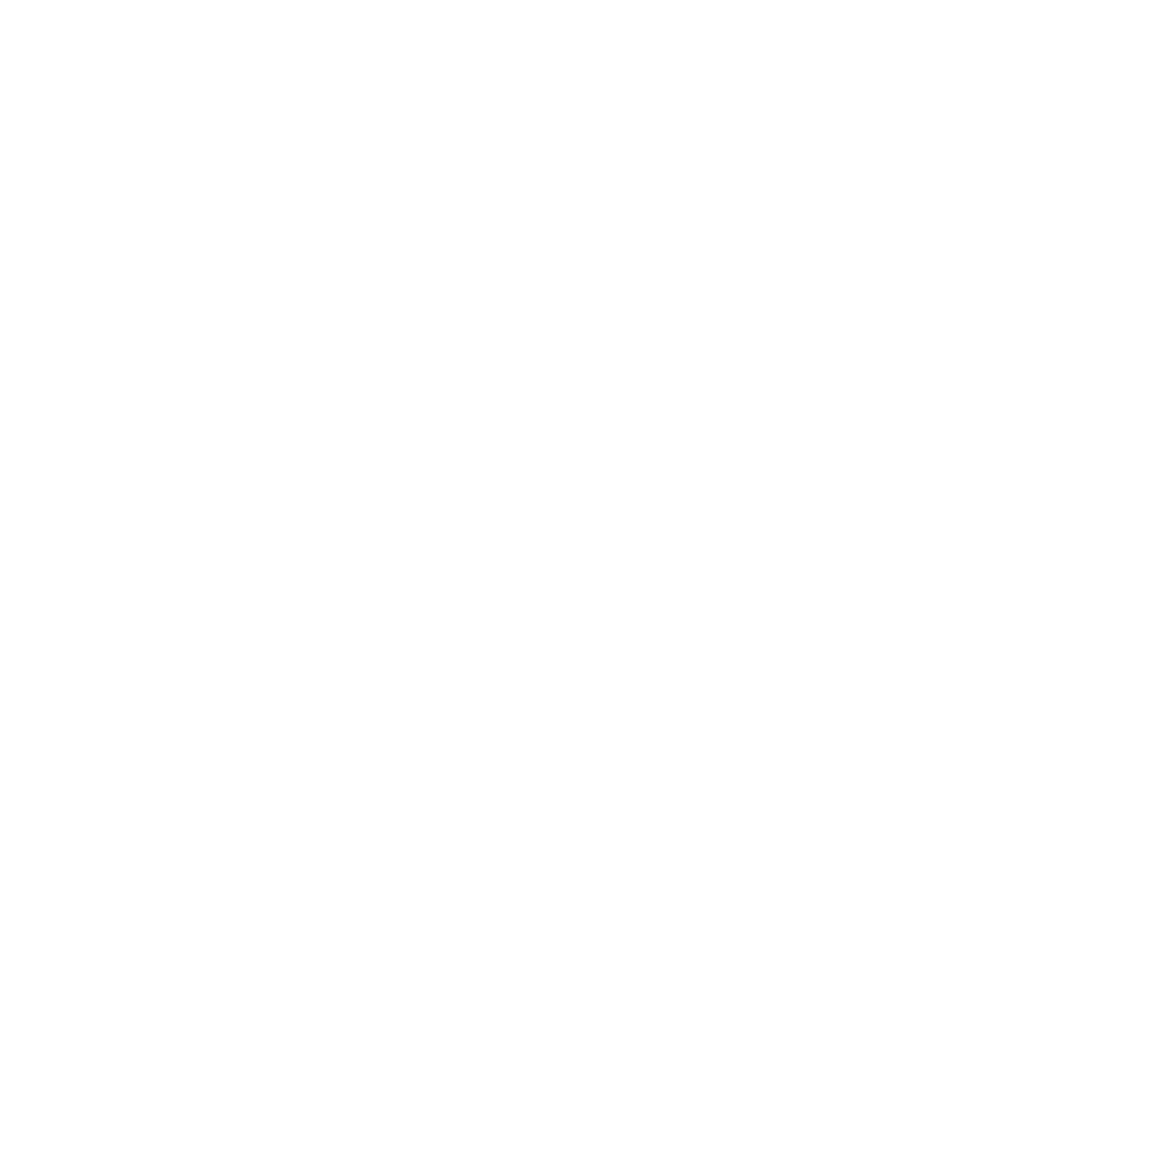 Project KnuckleHead